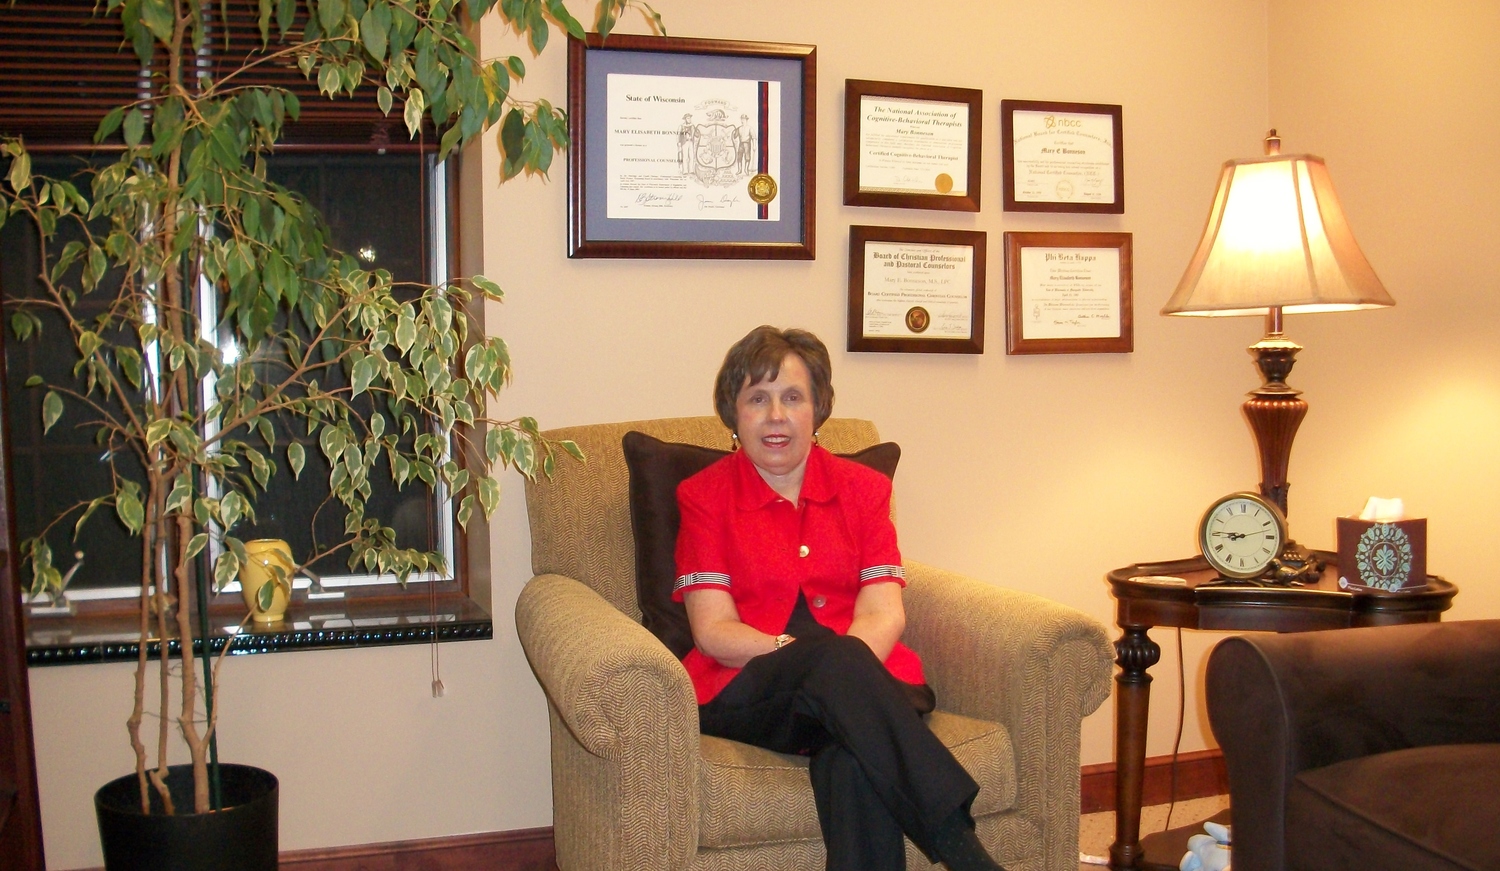 Gallery Photo of Mary Bonneson, MS, LPC, NCC at work, ready to assist you.